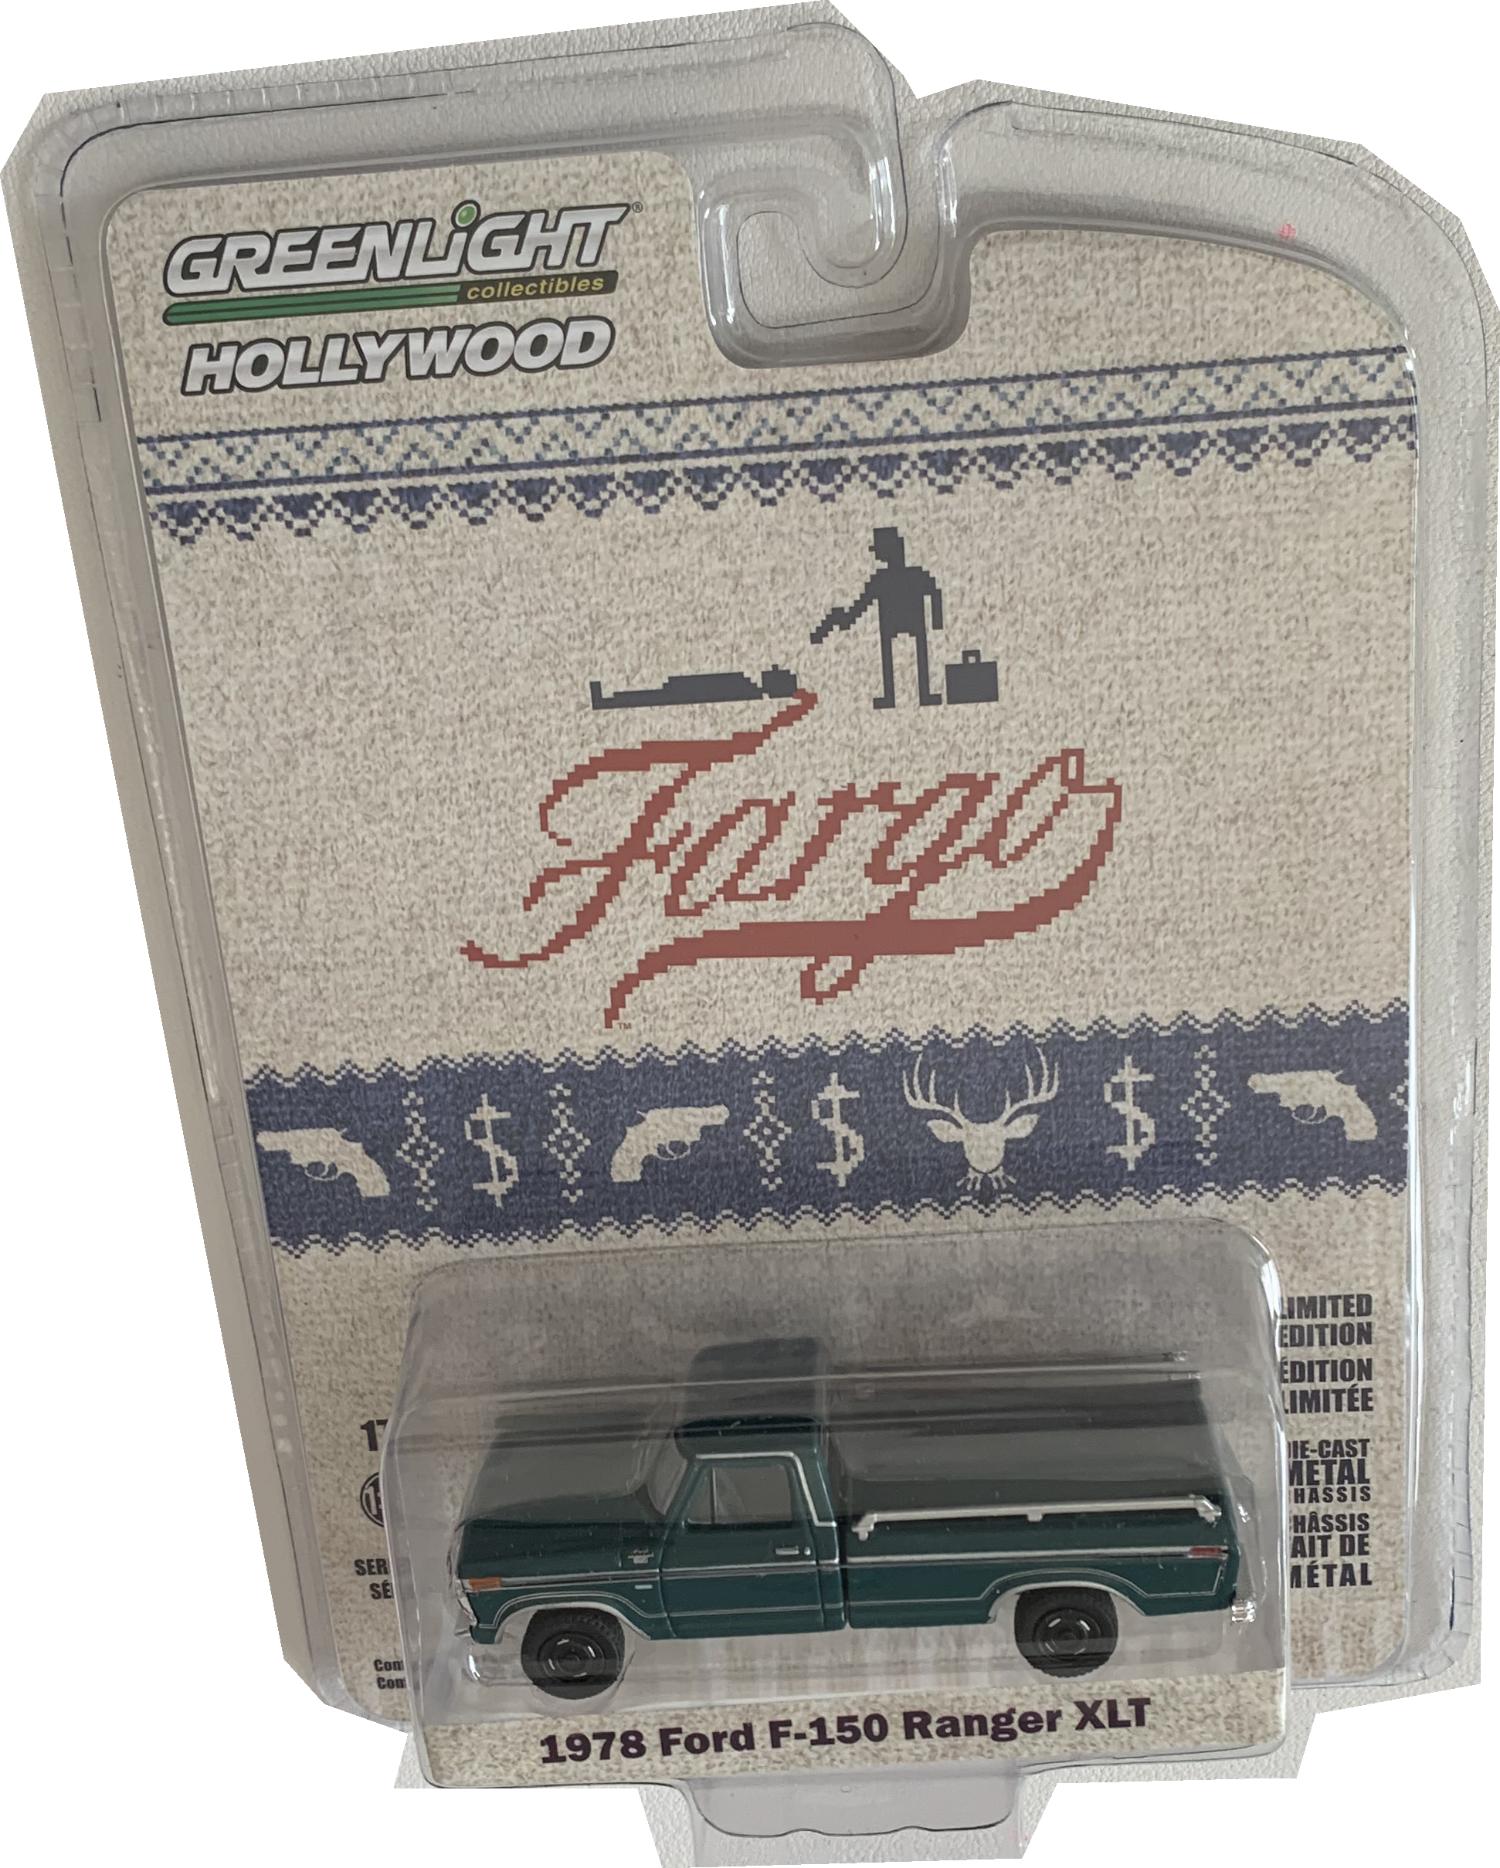 Fargo 1978 Ford F-150 Ranger XLT in green 1:64 scale model from Greenlight, limited edition model